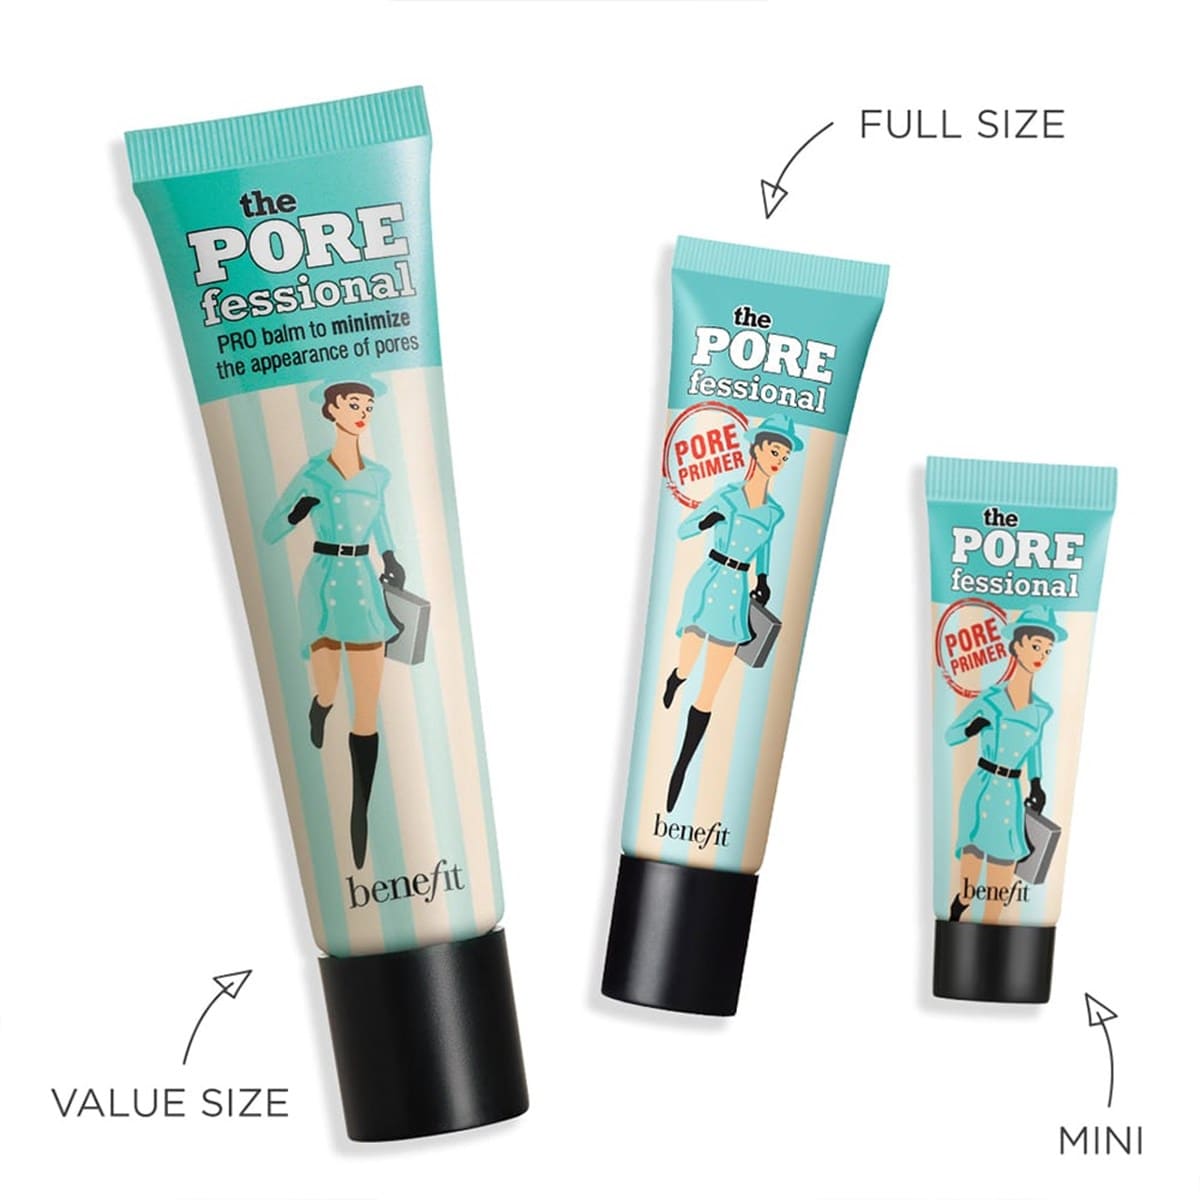 The POREfessional Face Primer PRO balm to minimize the appearance of pores by Benefit